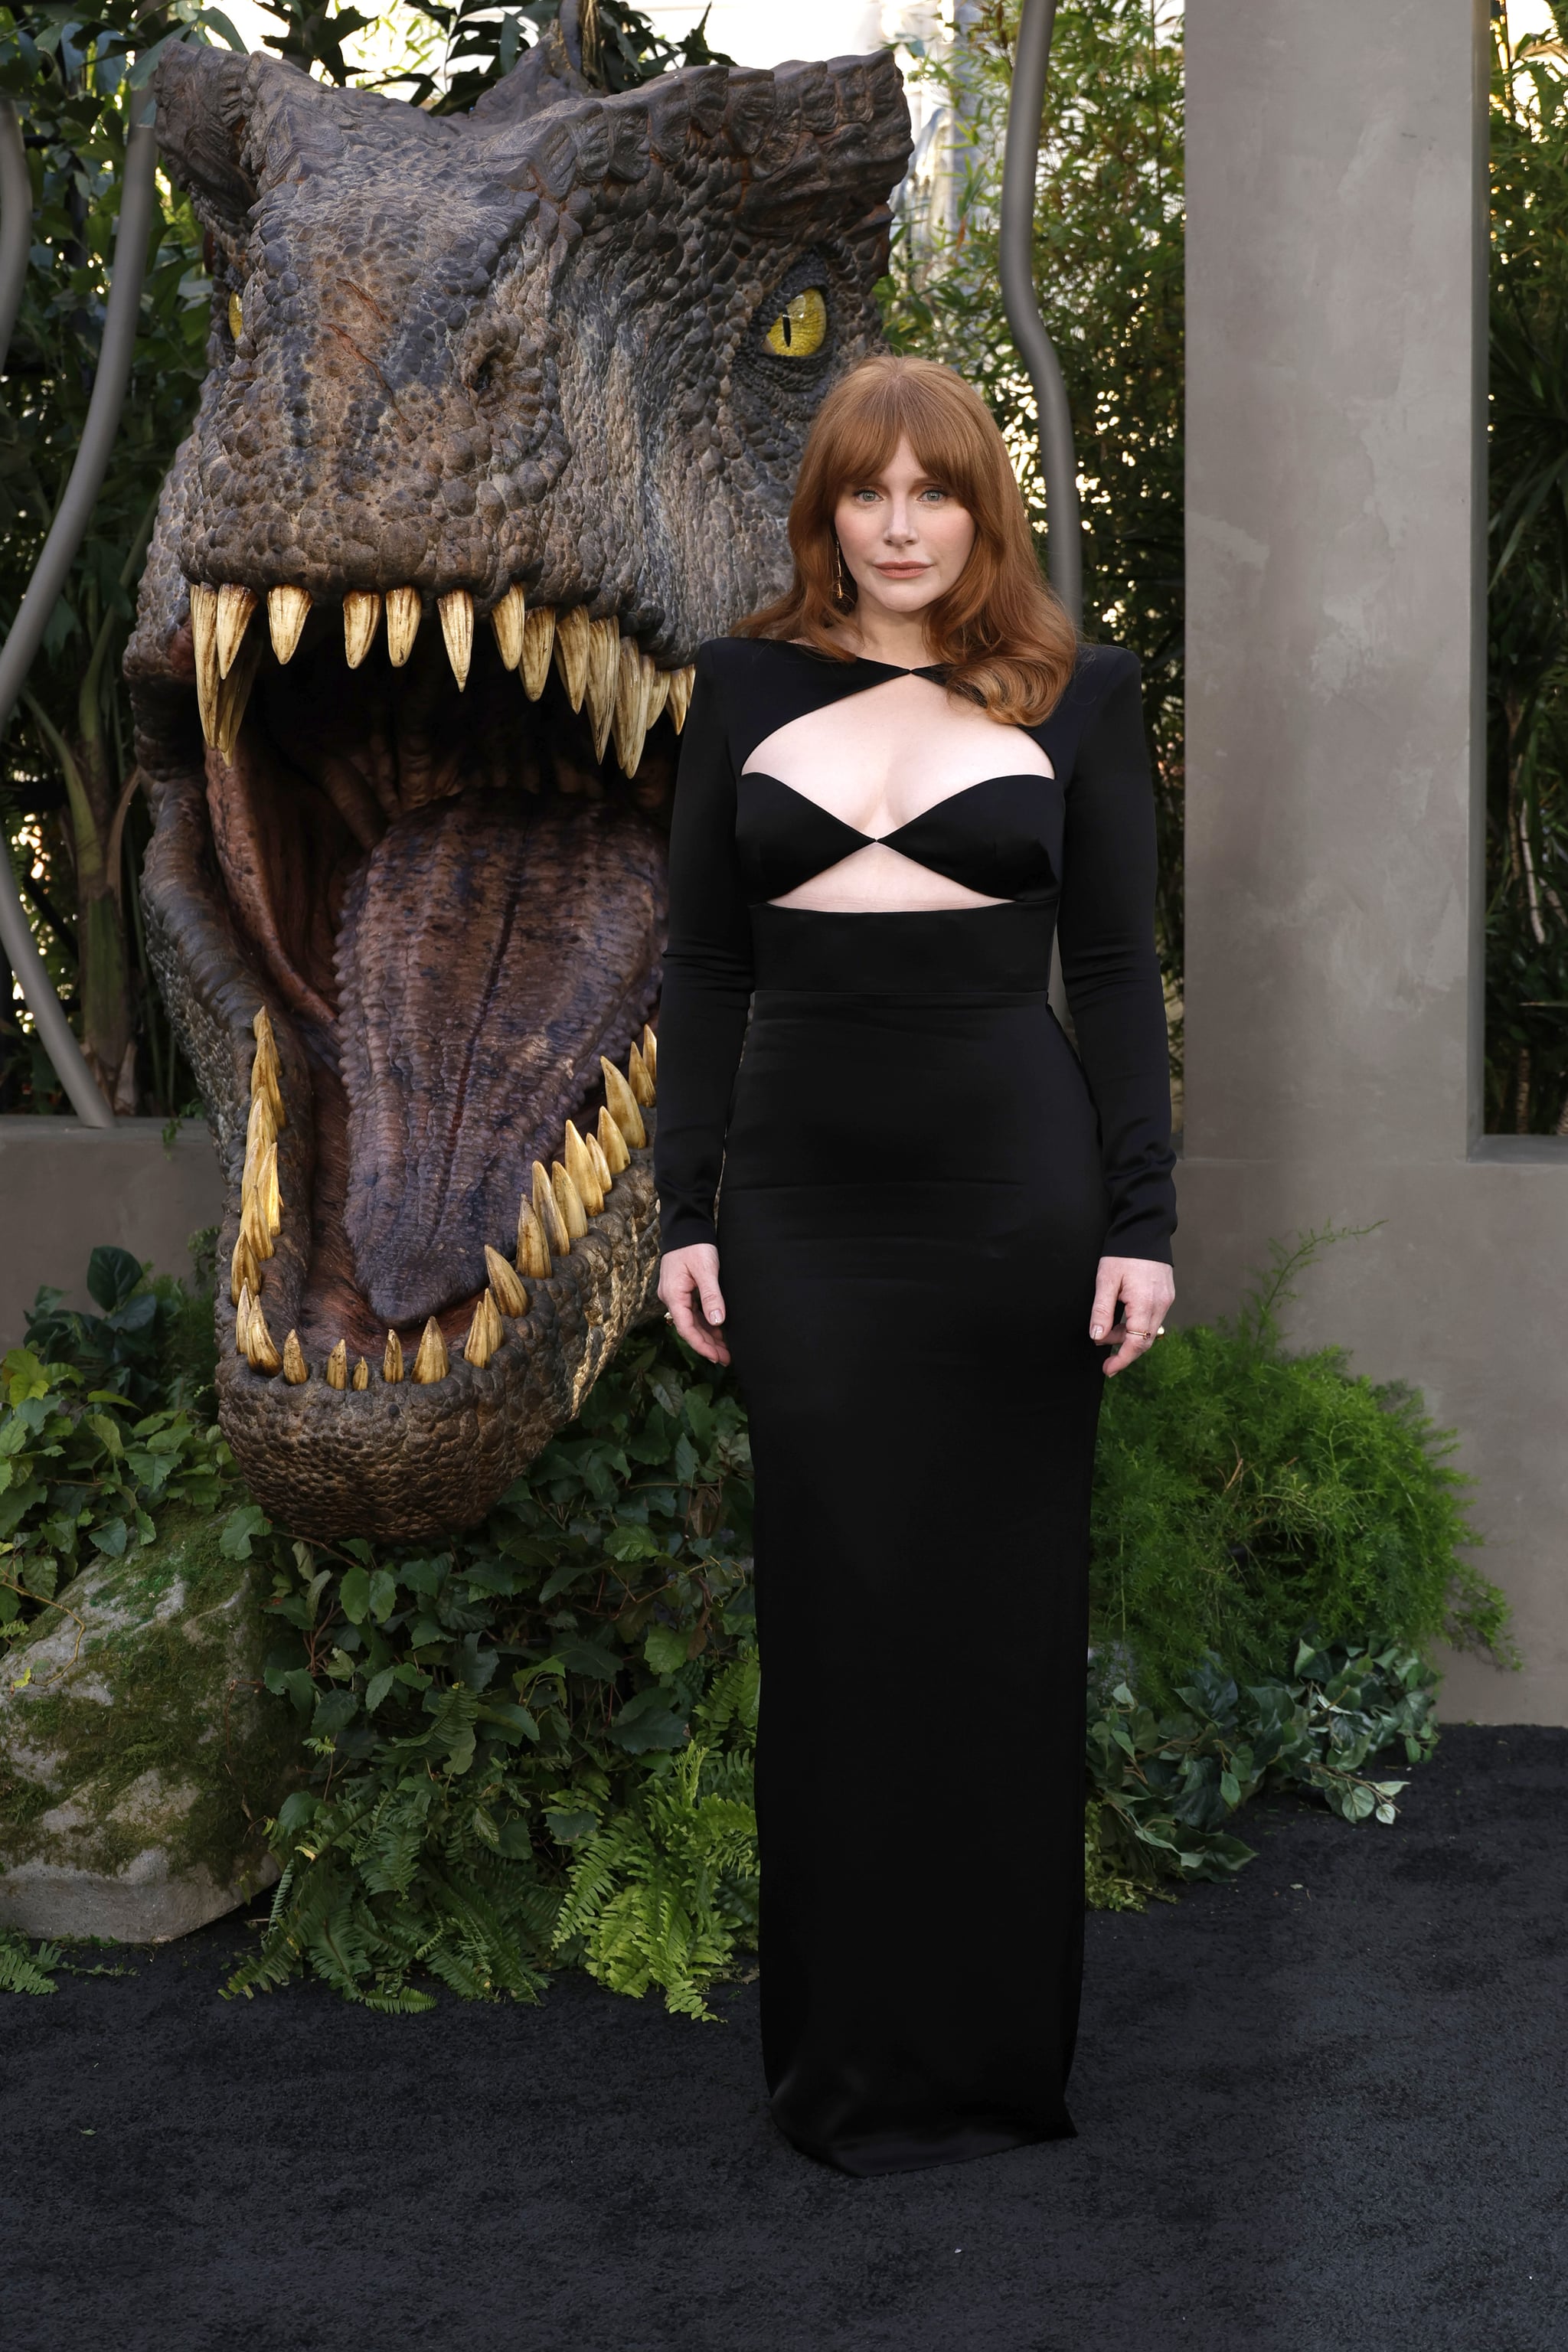 HOLLYWOOD, CALIFORNIA - JUNE 6: Bryce Dallas Howard attends the Los Angeles premiere of Universal Pictures' 